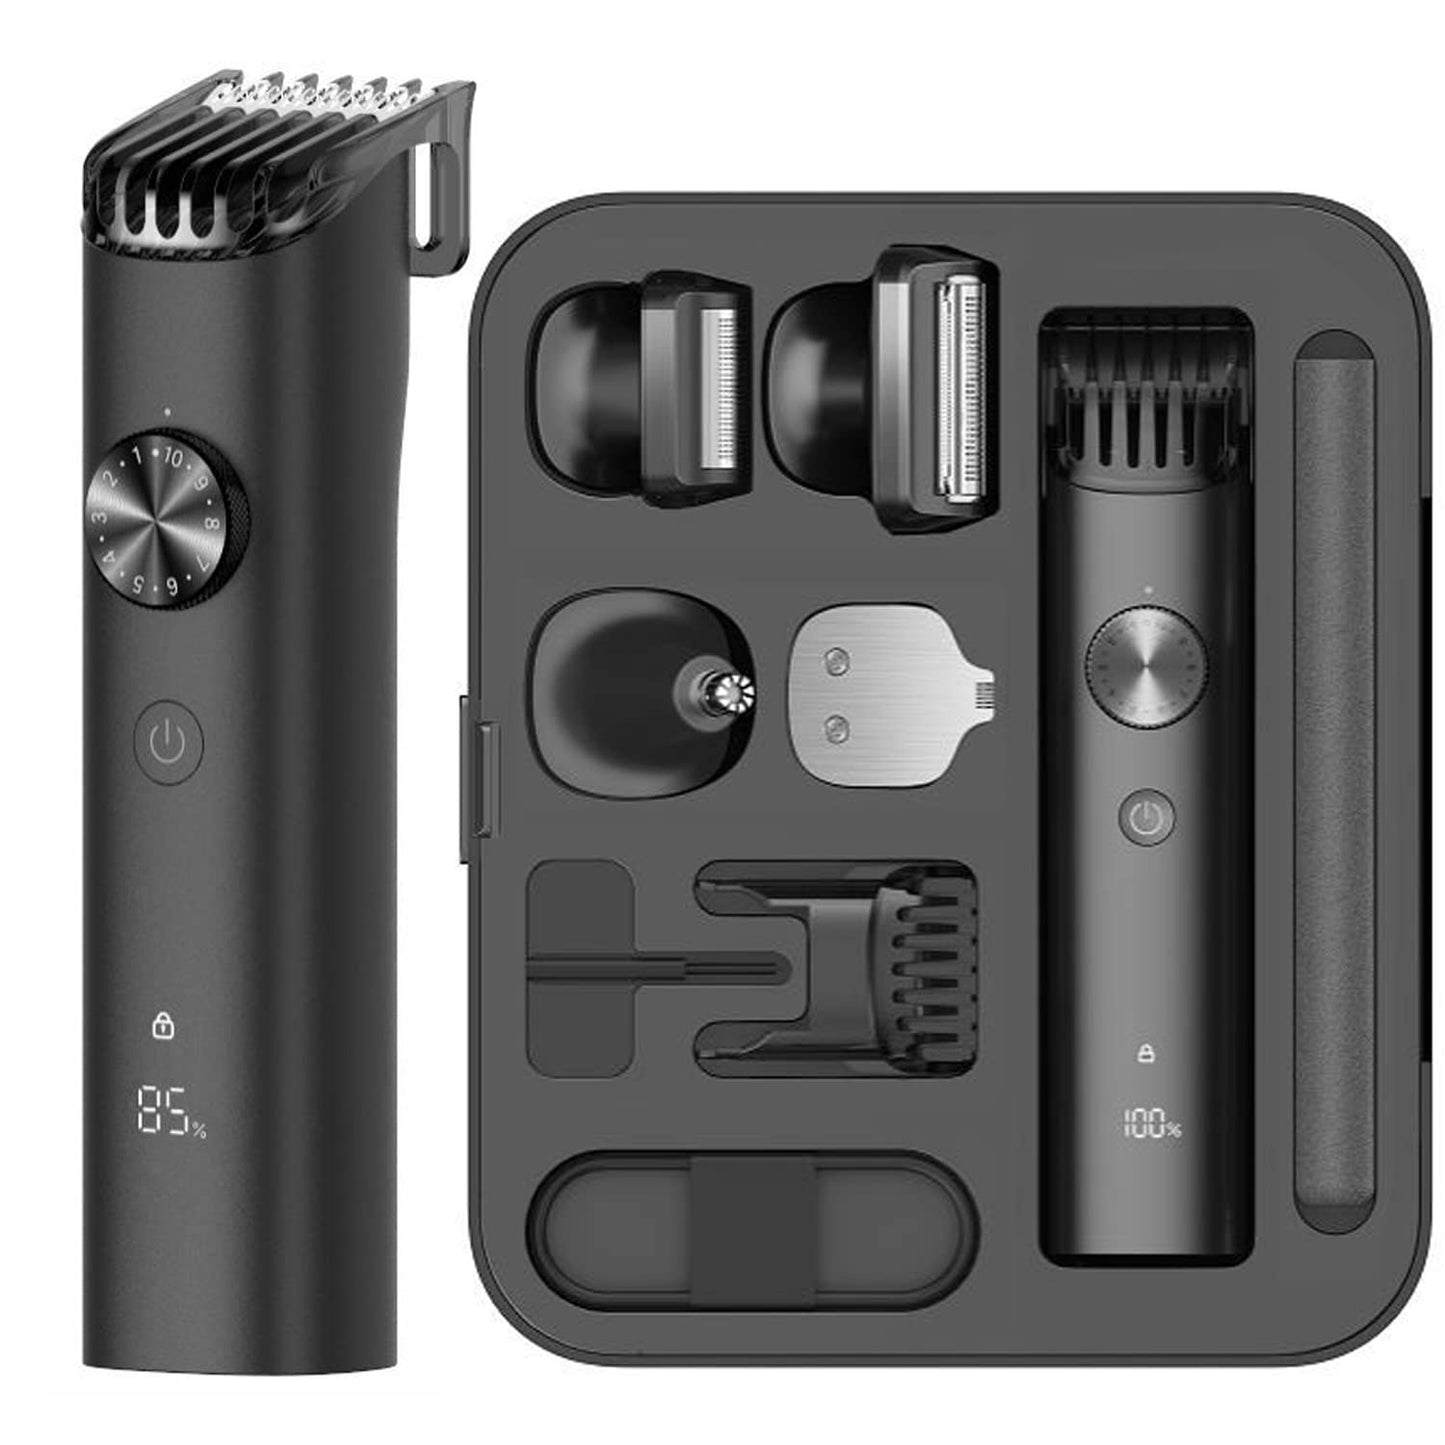 Xiaomi Grooming Kit Pro, Beard Trimmer for Men, IPX7 Waterproof Electric Razor Shavers, Hair Trimmer for Nose Ear Mustache Face Body, 40 Length Settings, Cordless Clippers, Gifts for Men